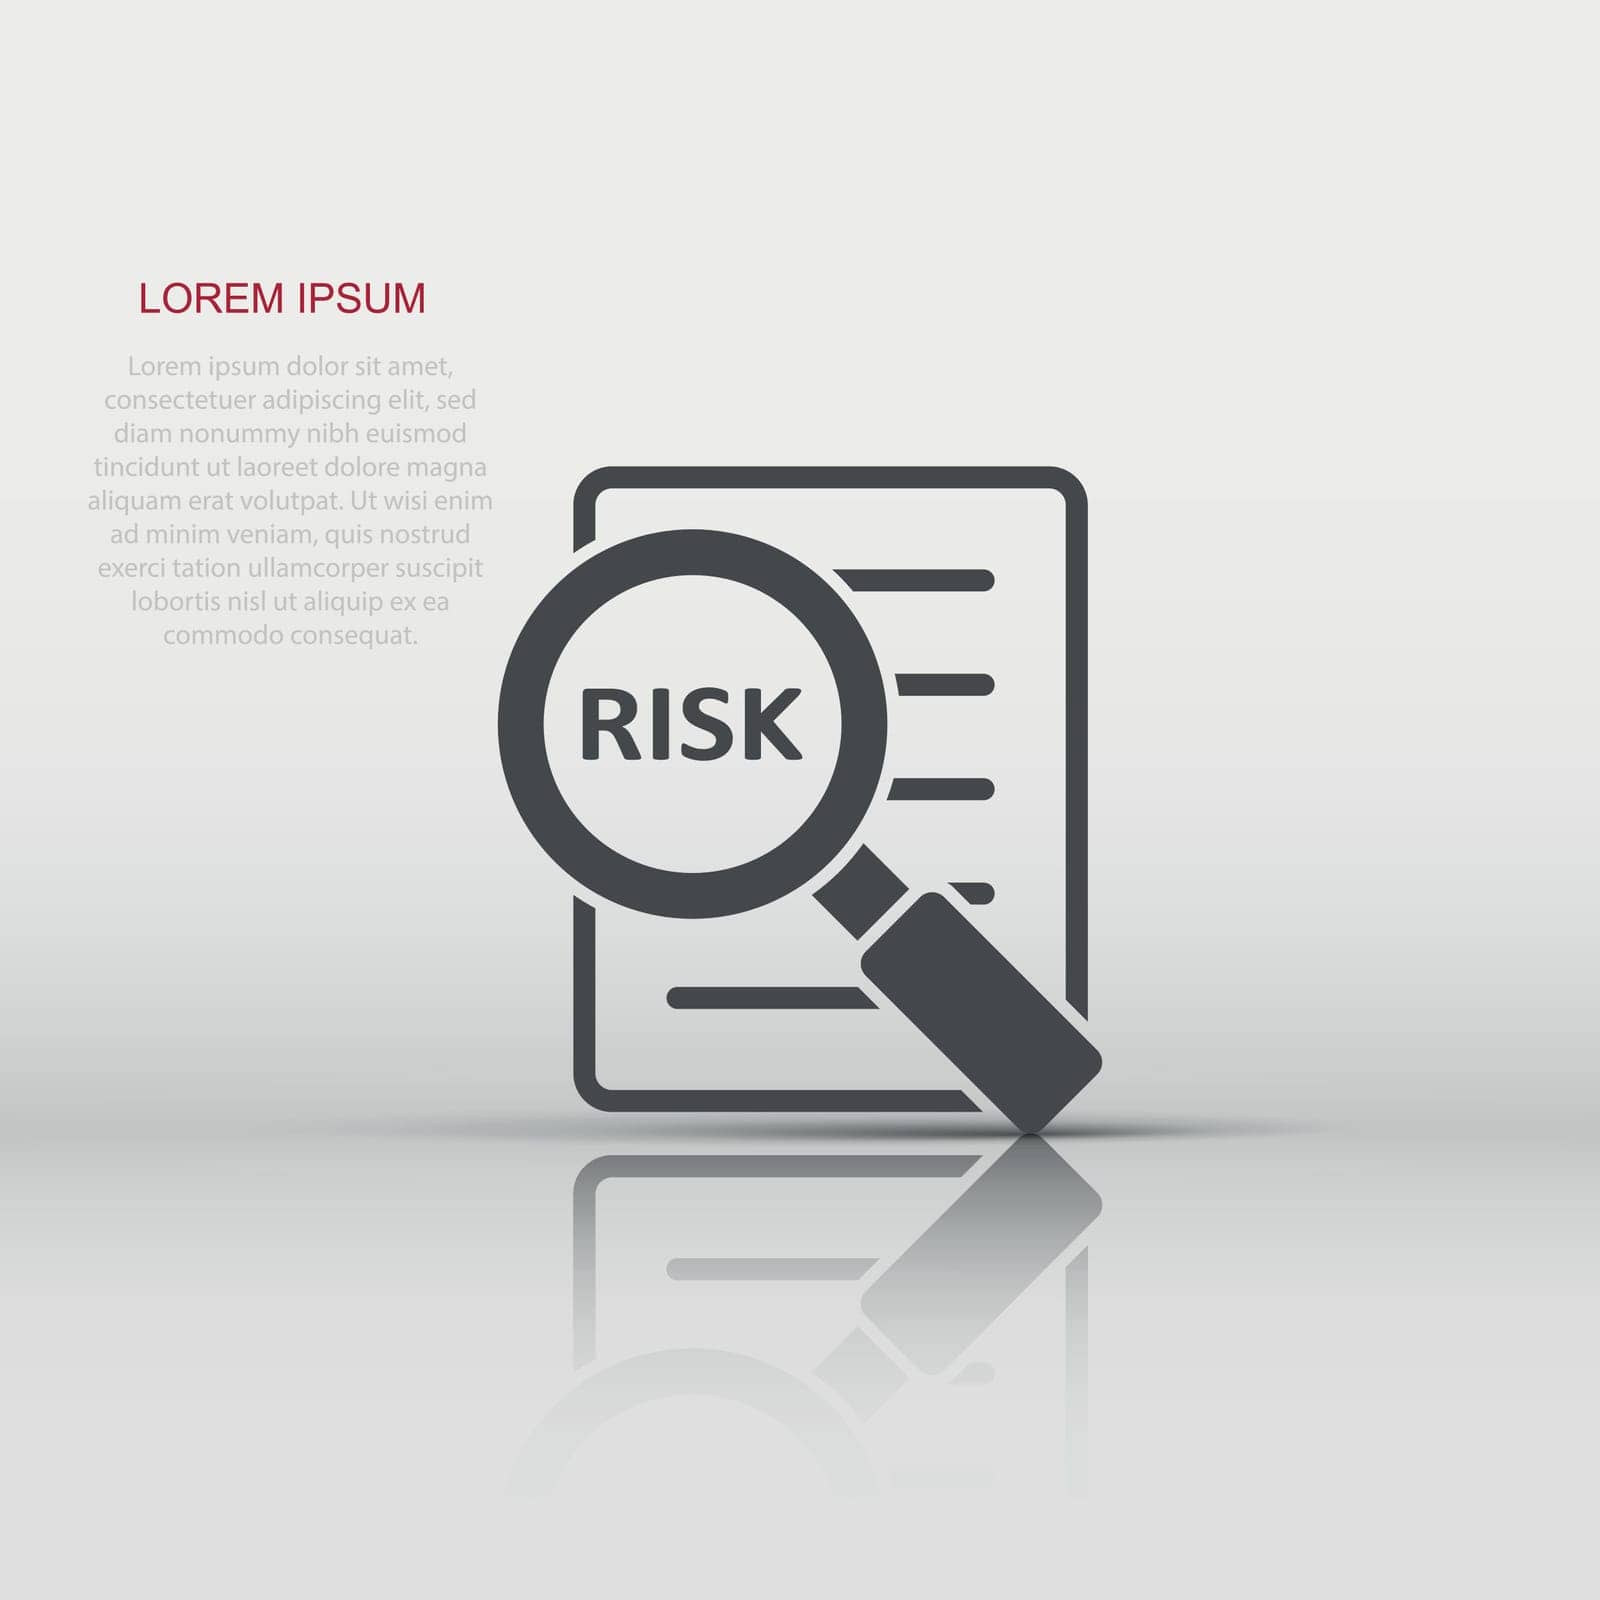 Risk management icon in flat style. Document vector illustration on white isolated background. Assessment data sign business concept.